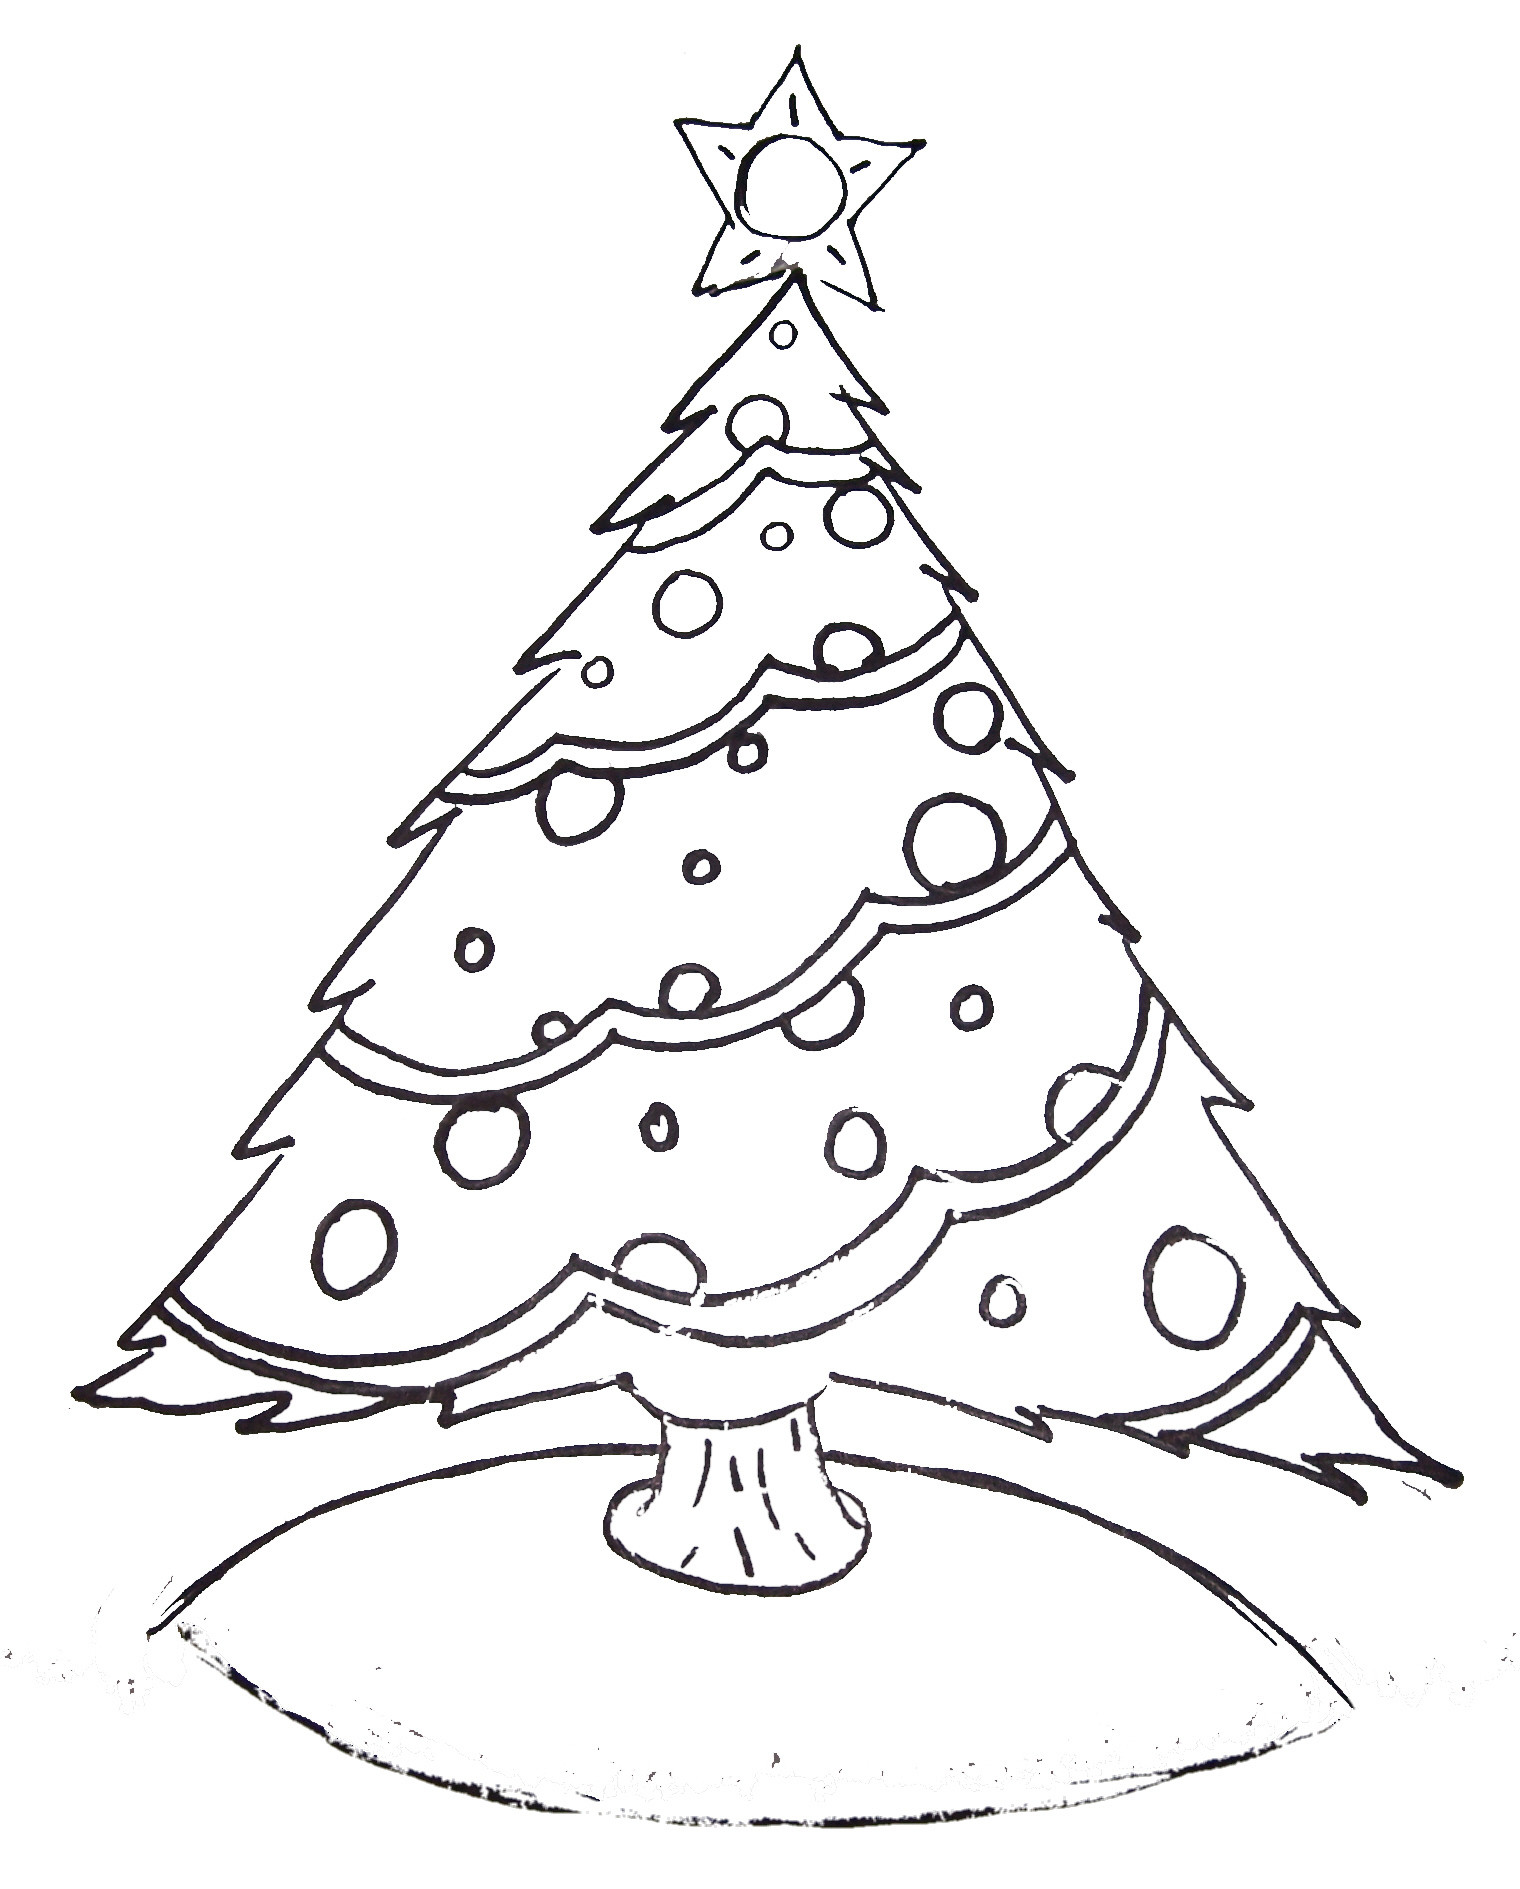 Christmas Tree Coloring Pages For Kids
 Free Printable Christmas Tree and Santa Coloring Pages